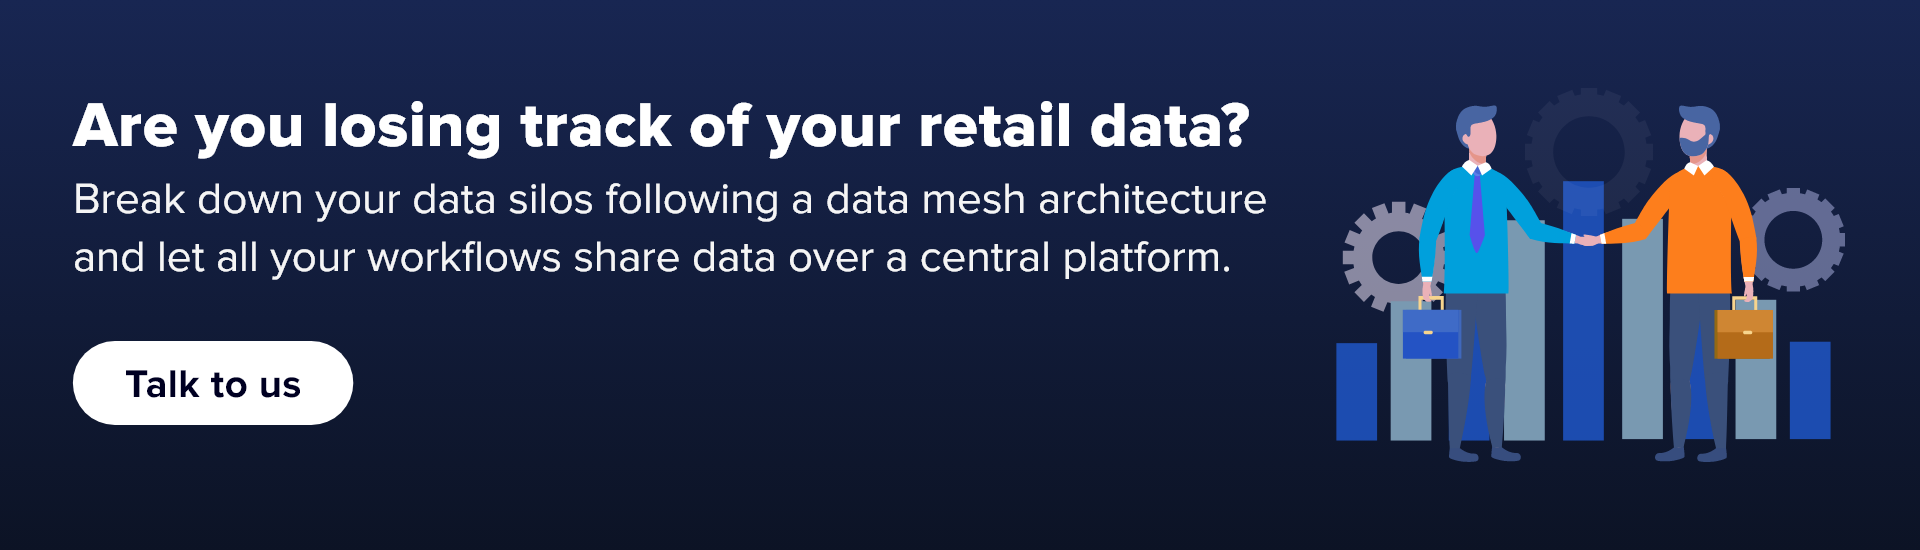 Data silos in retail business